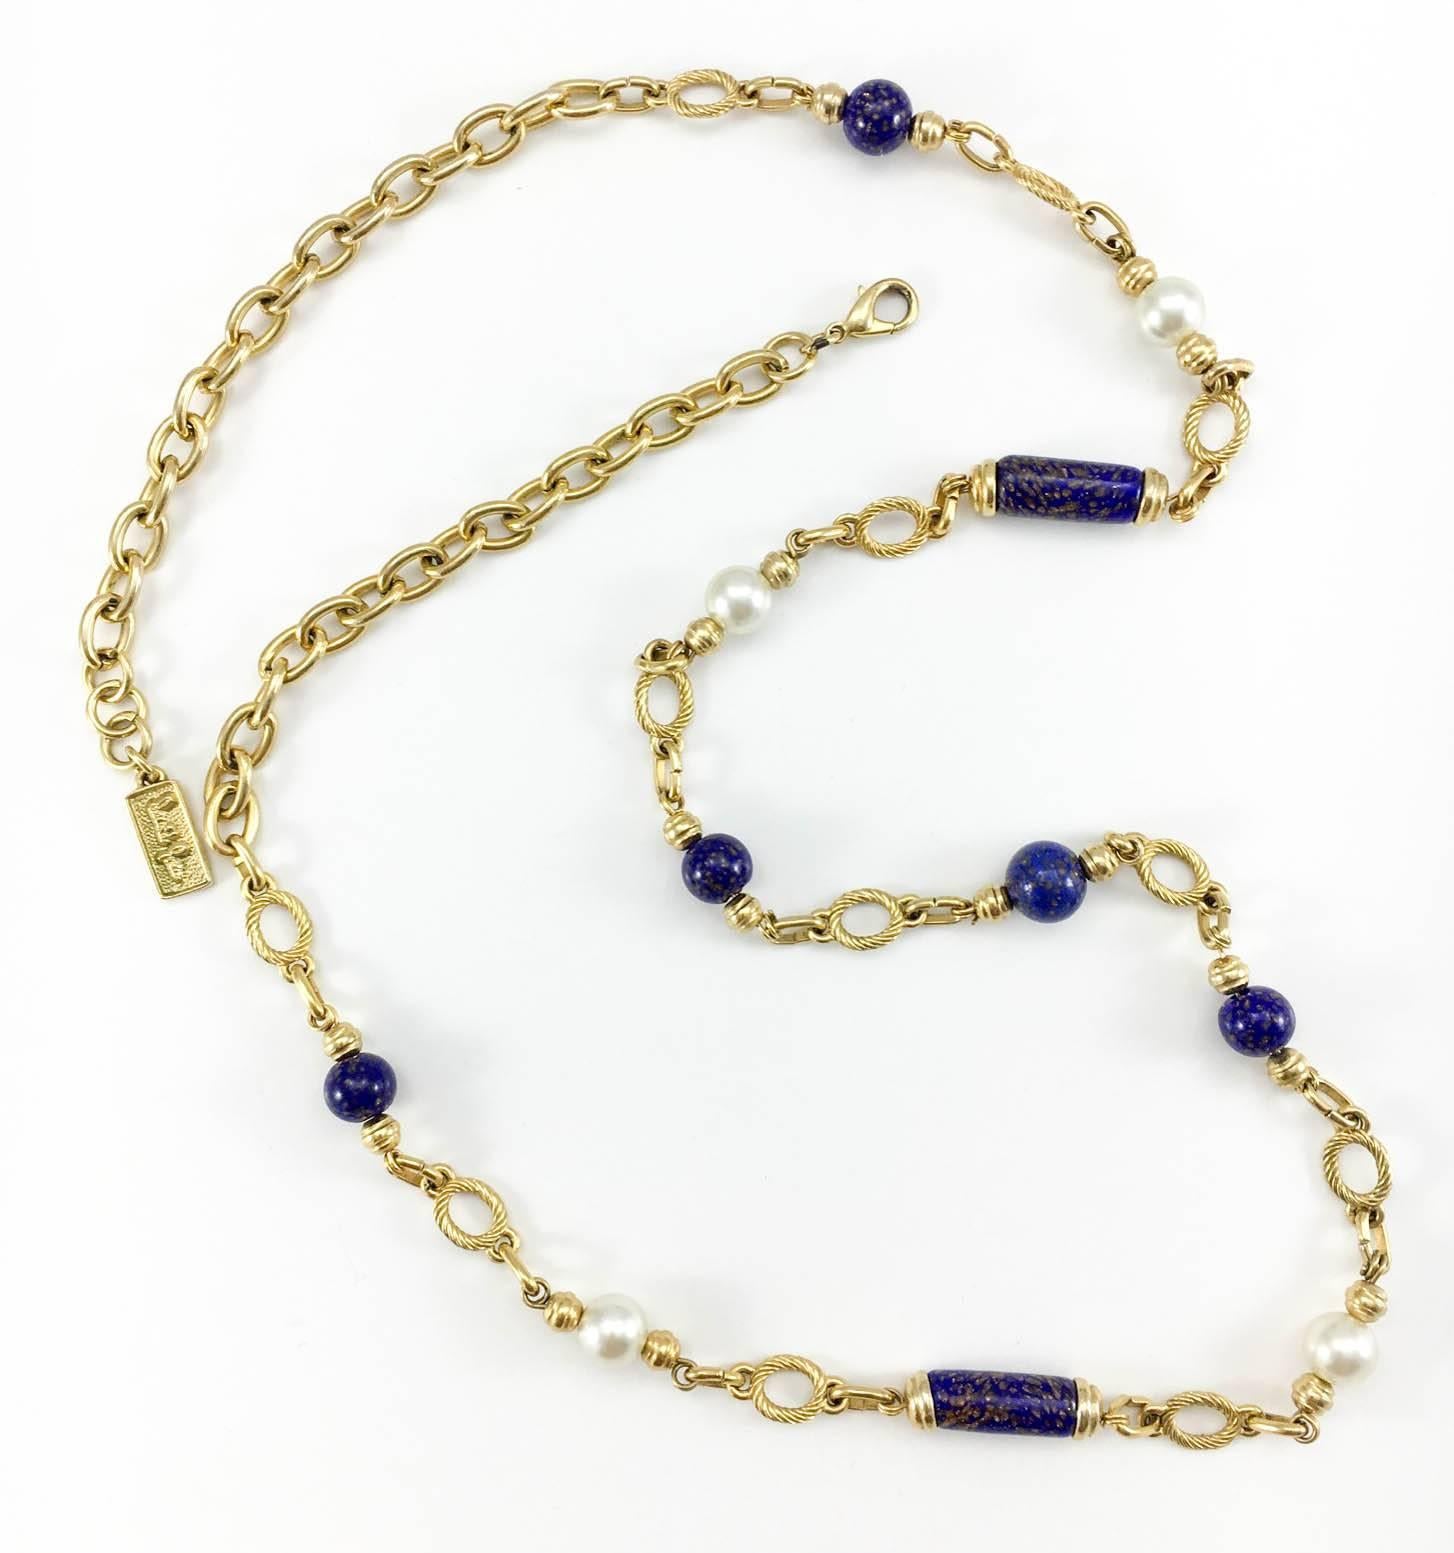 Vintage David Grau Beaded Necklace. Very stylish long chain with beads by Spanish designer David Grau. Blue and golden glass beads and glass pearls are distributed along the gilt links. Signed.

Label / Designer: David Grau
Period: 1990s
Origin: